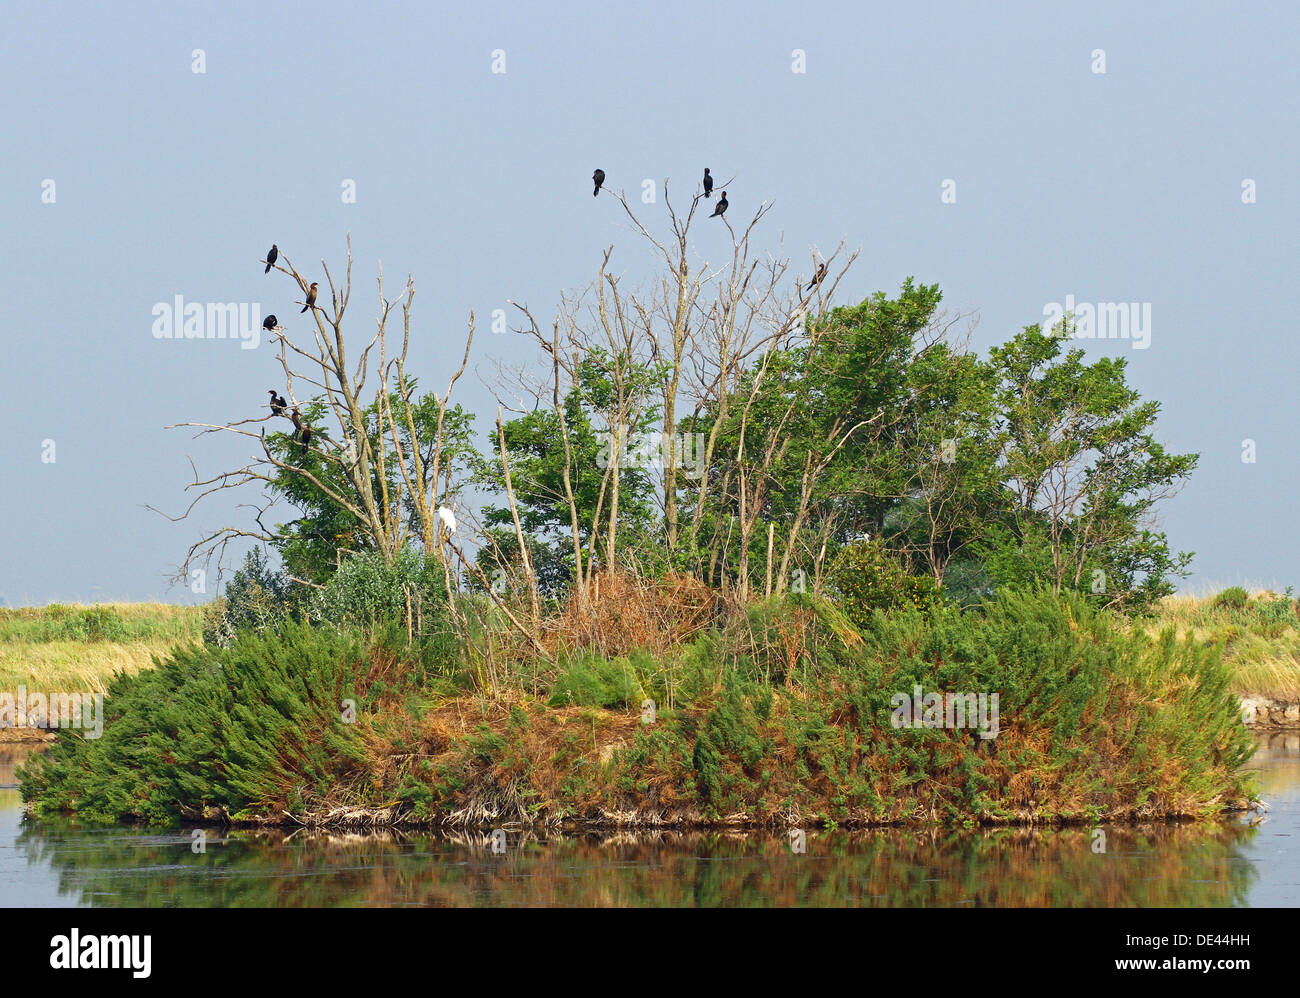 black vultures and crows in the uninhabited island as an ancient omen of death 2 Stock Photo